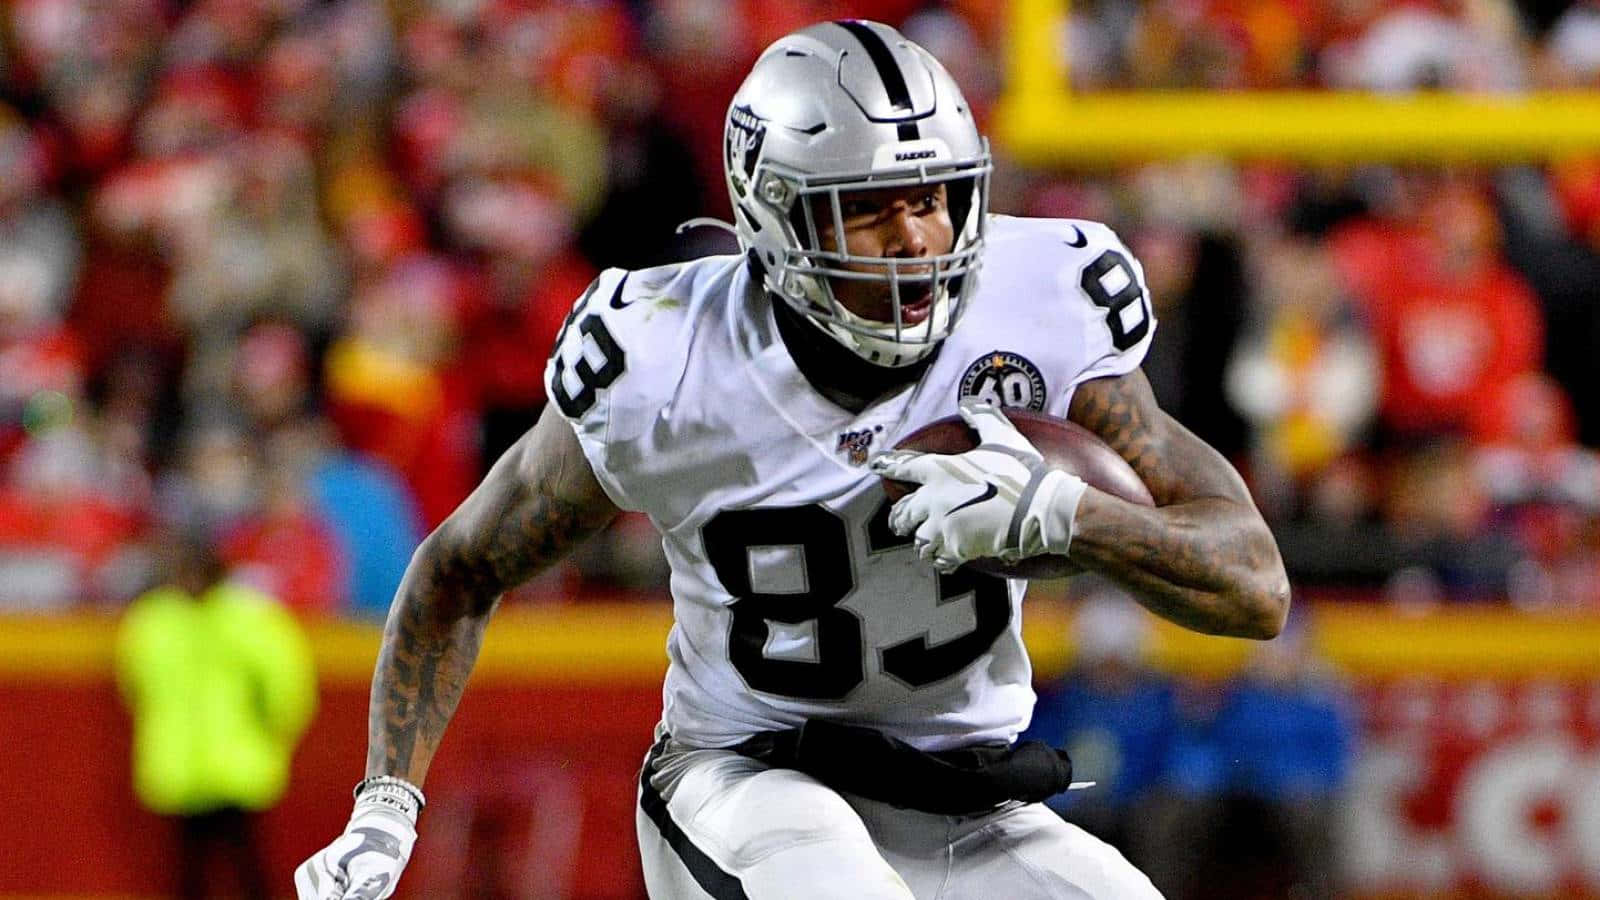 Darren Waller is a Raiders cheat code at TE if he can stay on the field   SBNationcom